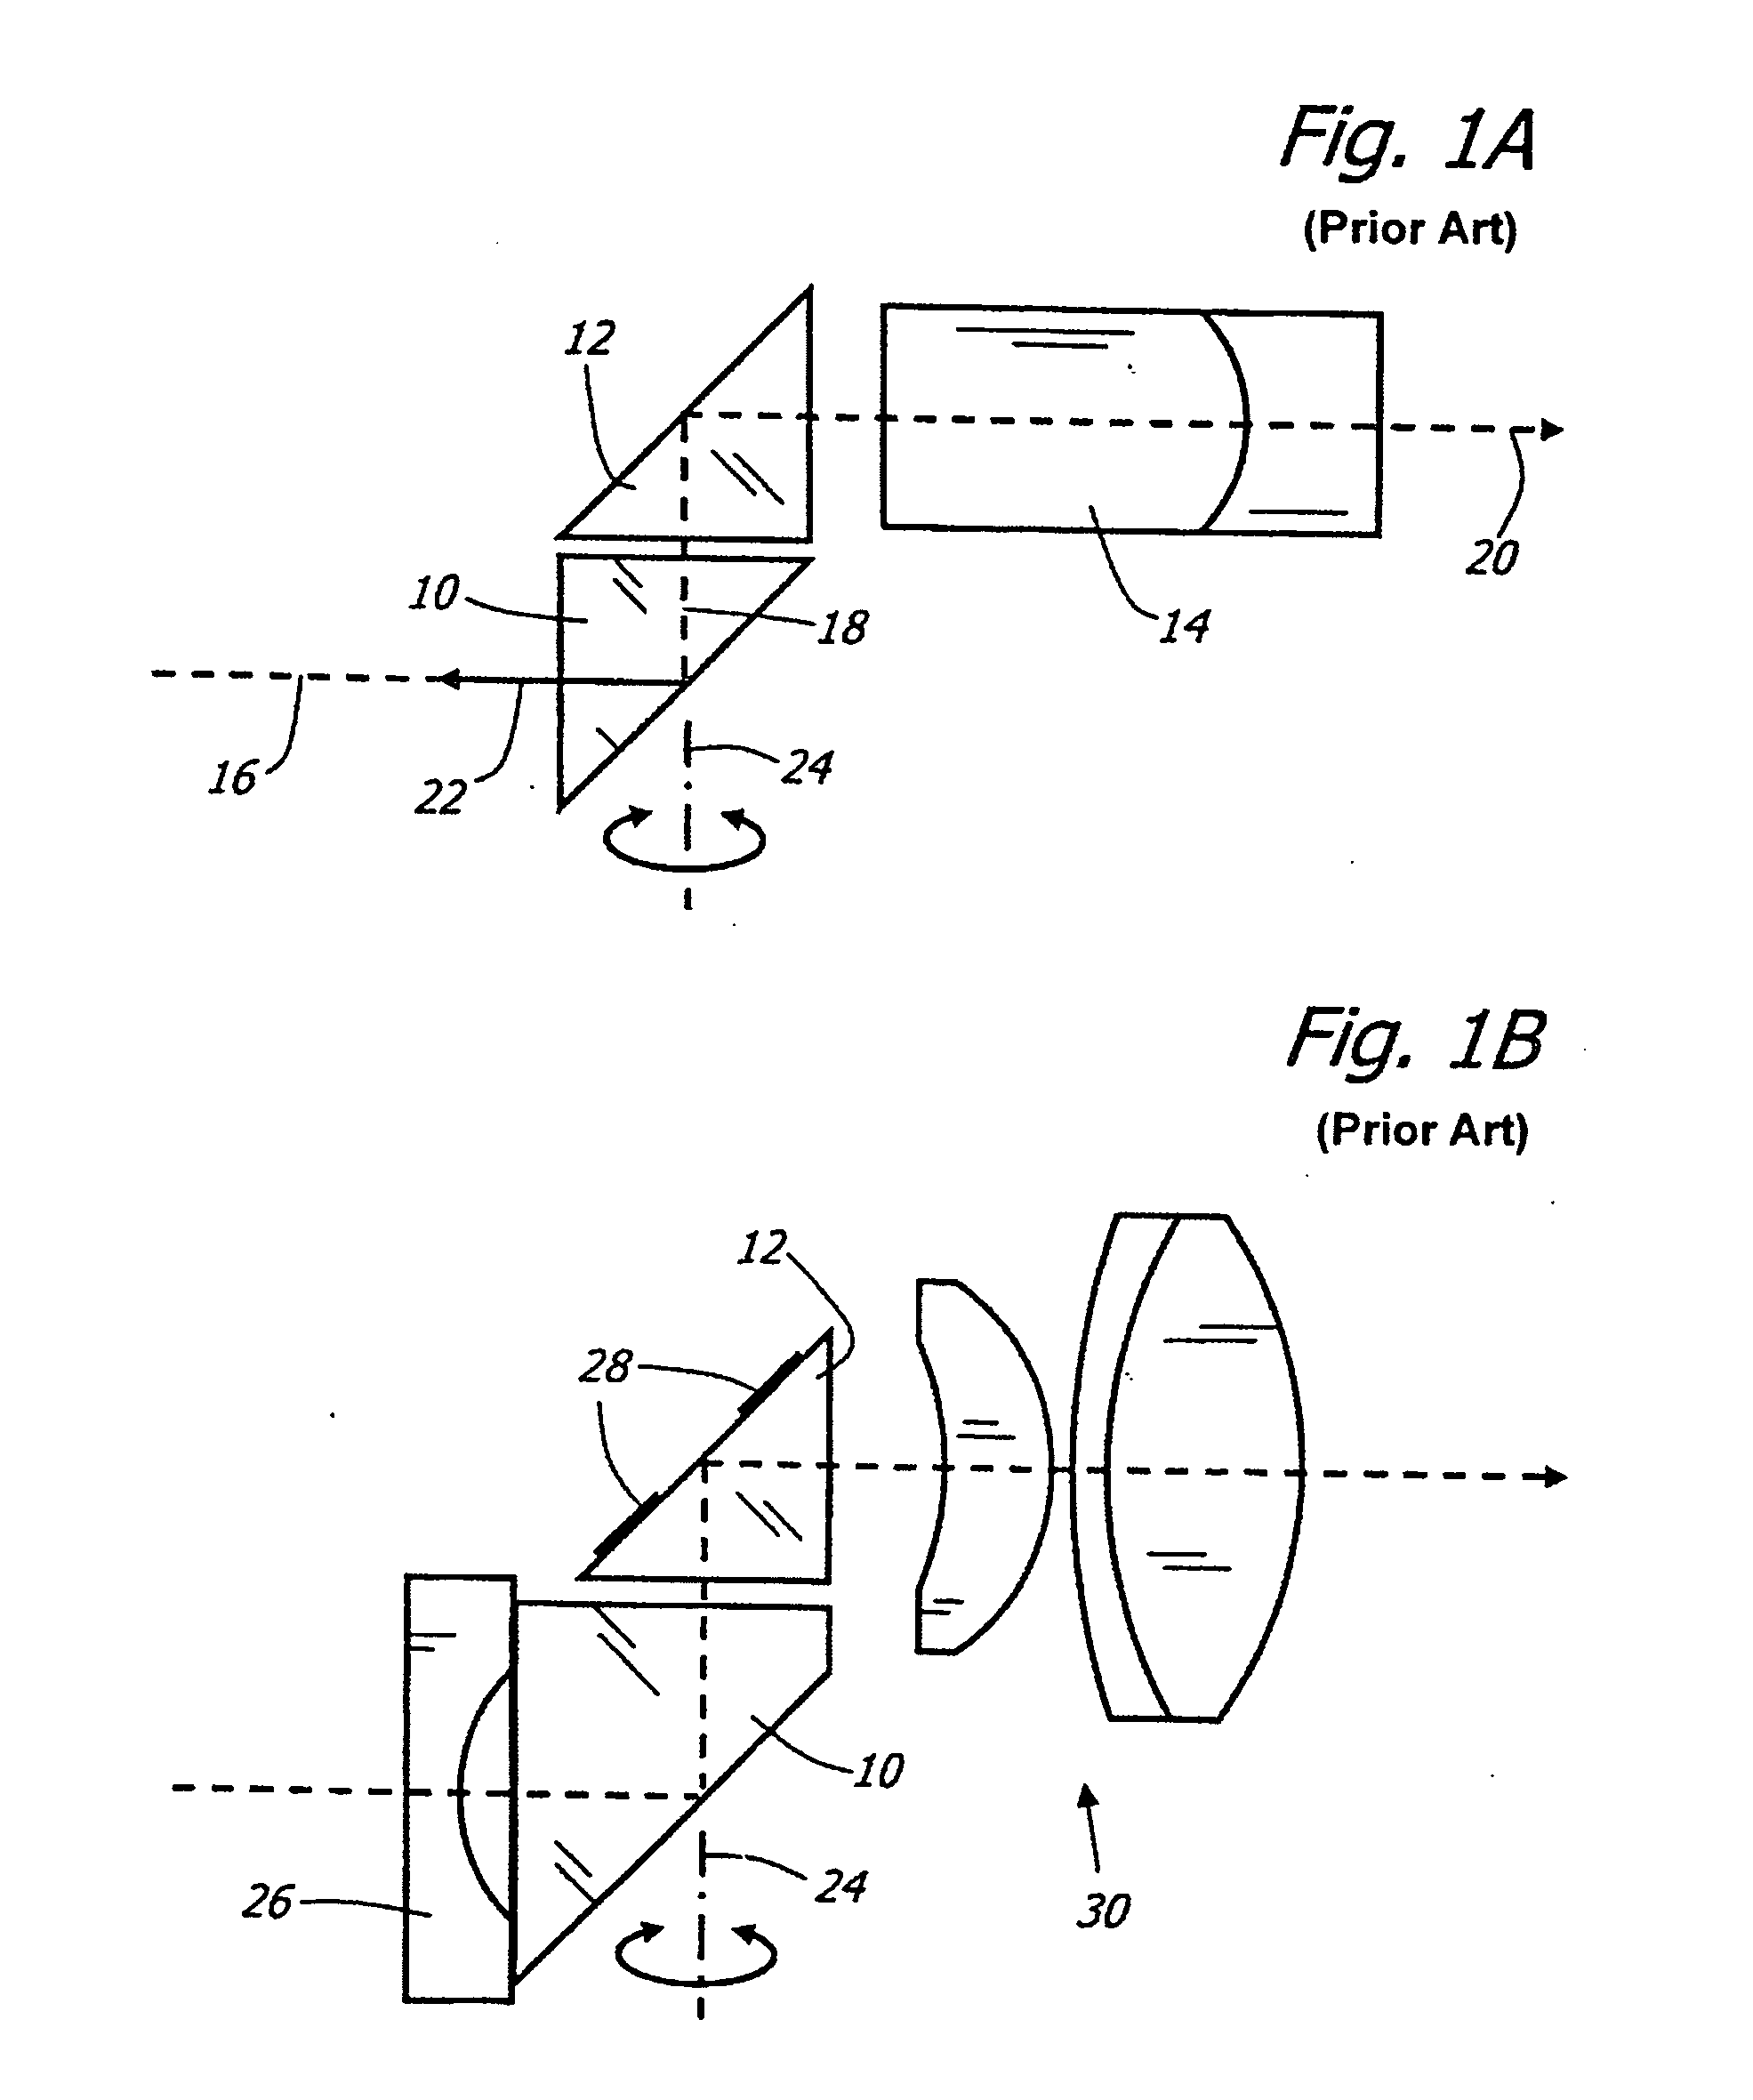 Optical system for variable direction of view instrument